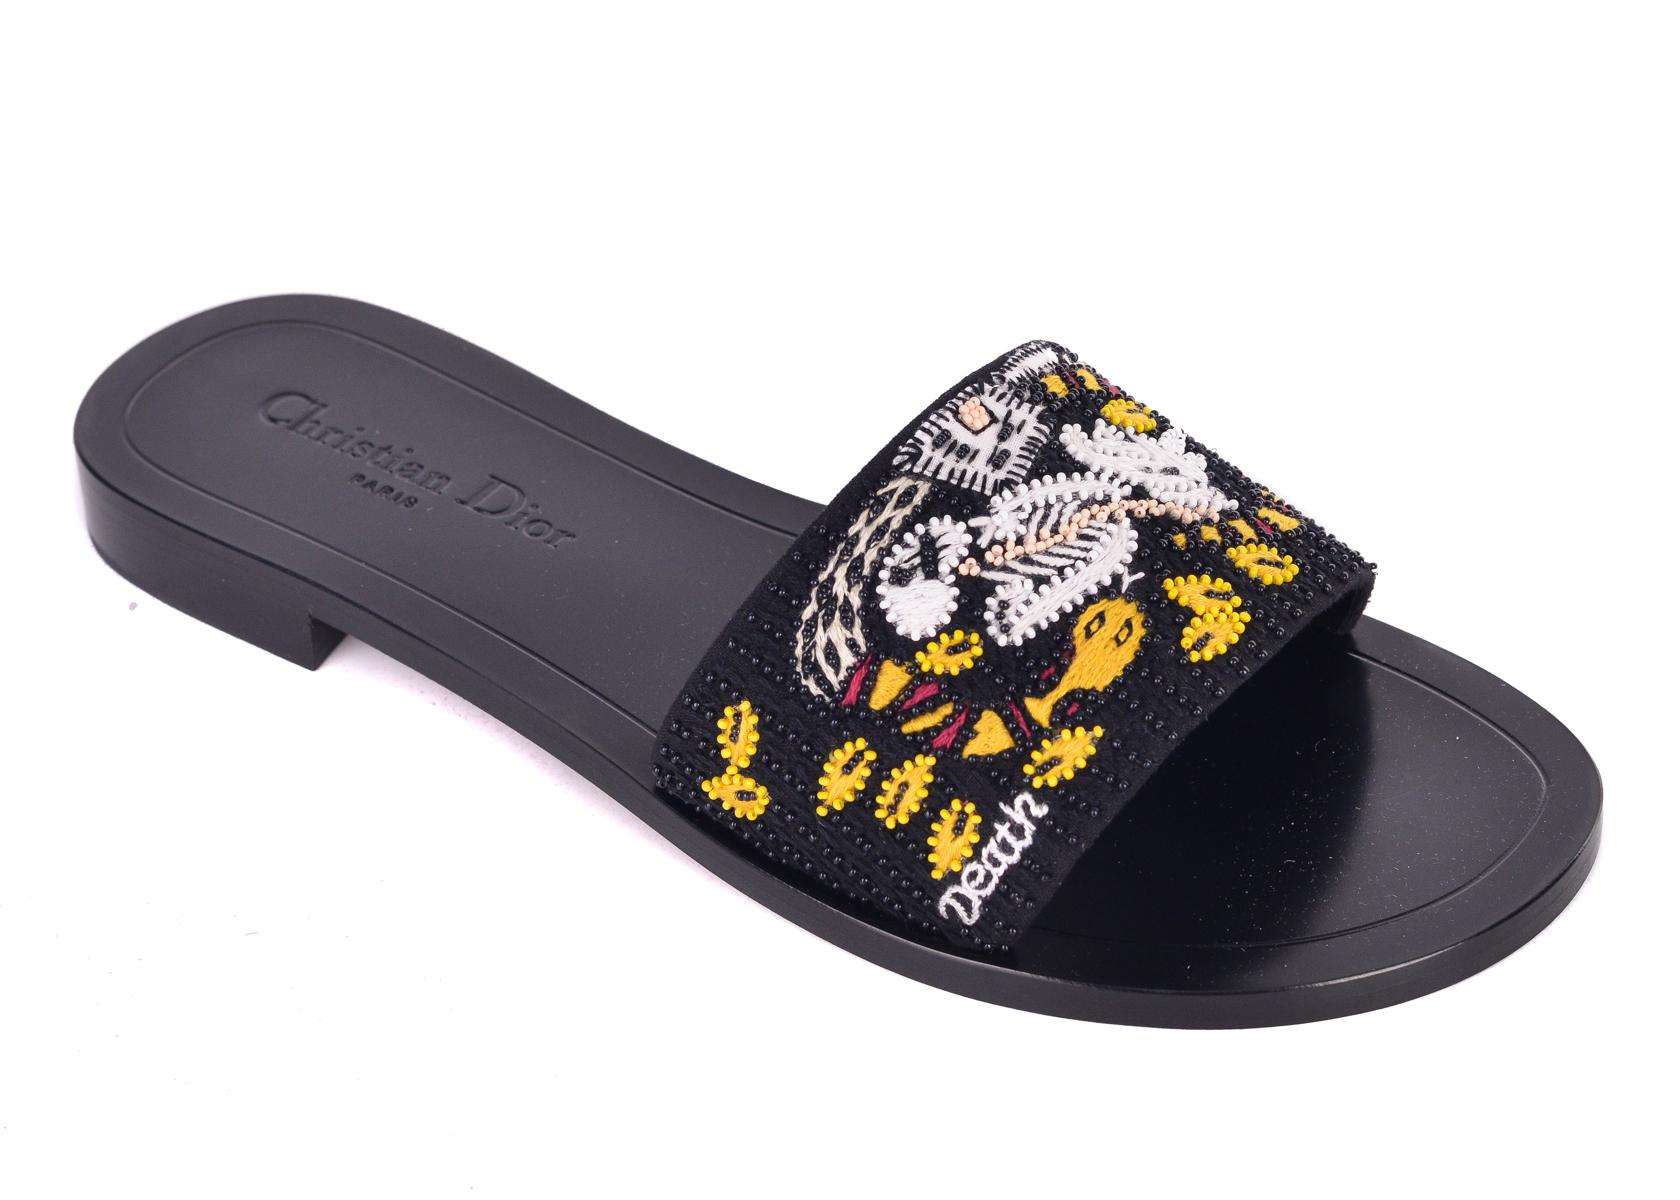 Christian Dior's Dior Tarot Death Embroidered Slippers. These slippers are crafted with intricate embroidered designs for a chic edgy look. Pair with regular denims for those slipper clogs for a chic everyday look.

Christian Dior's Dior Tarot Death